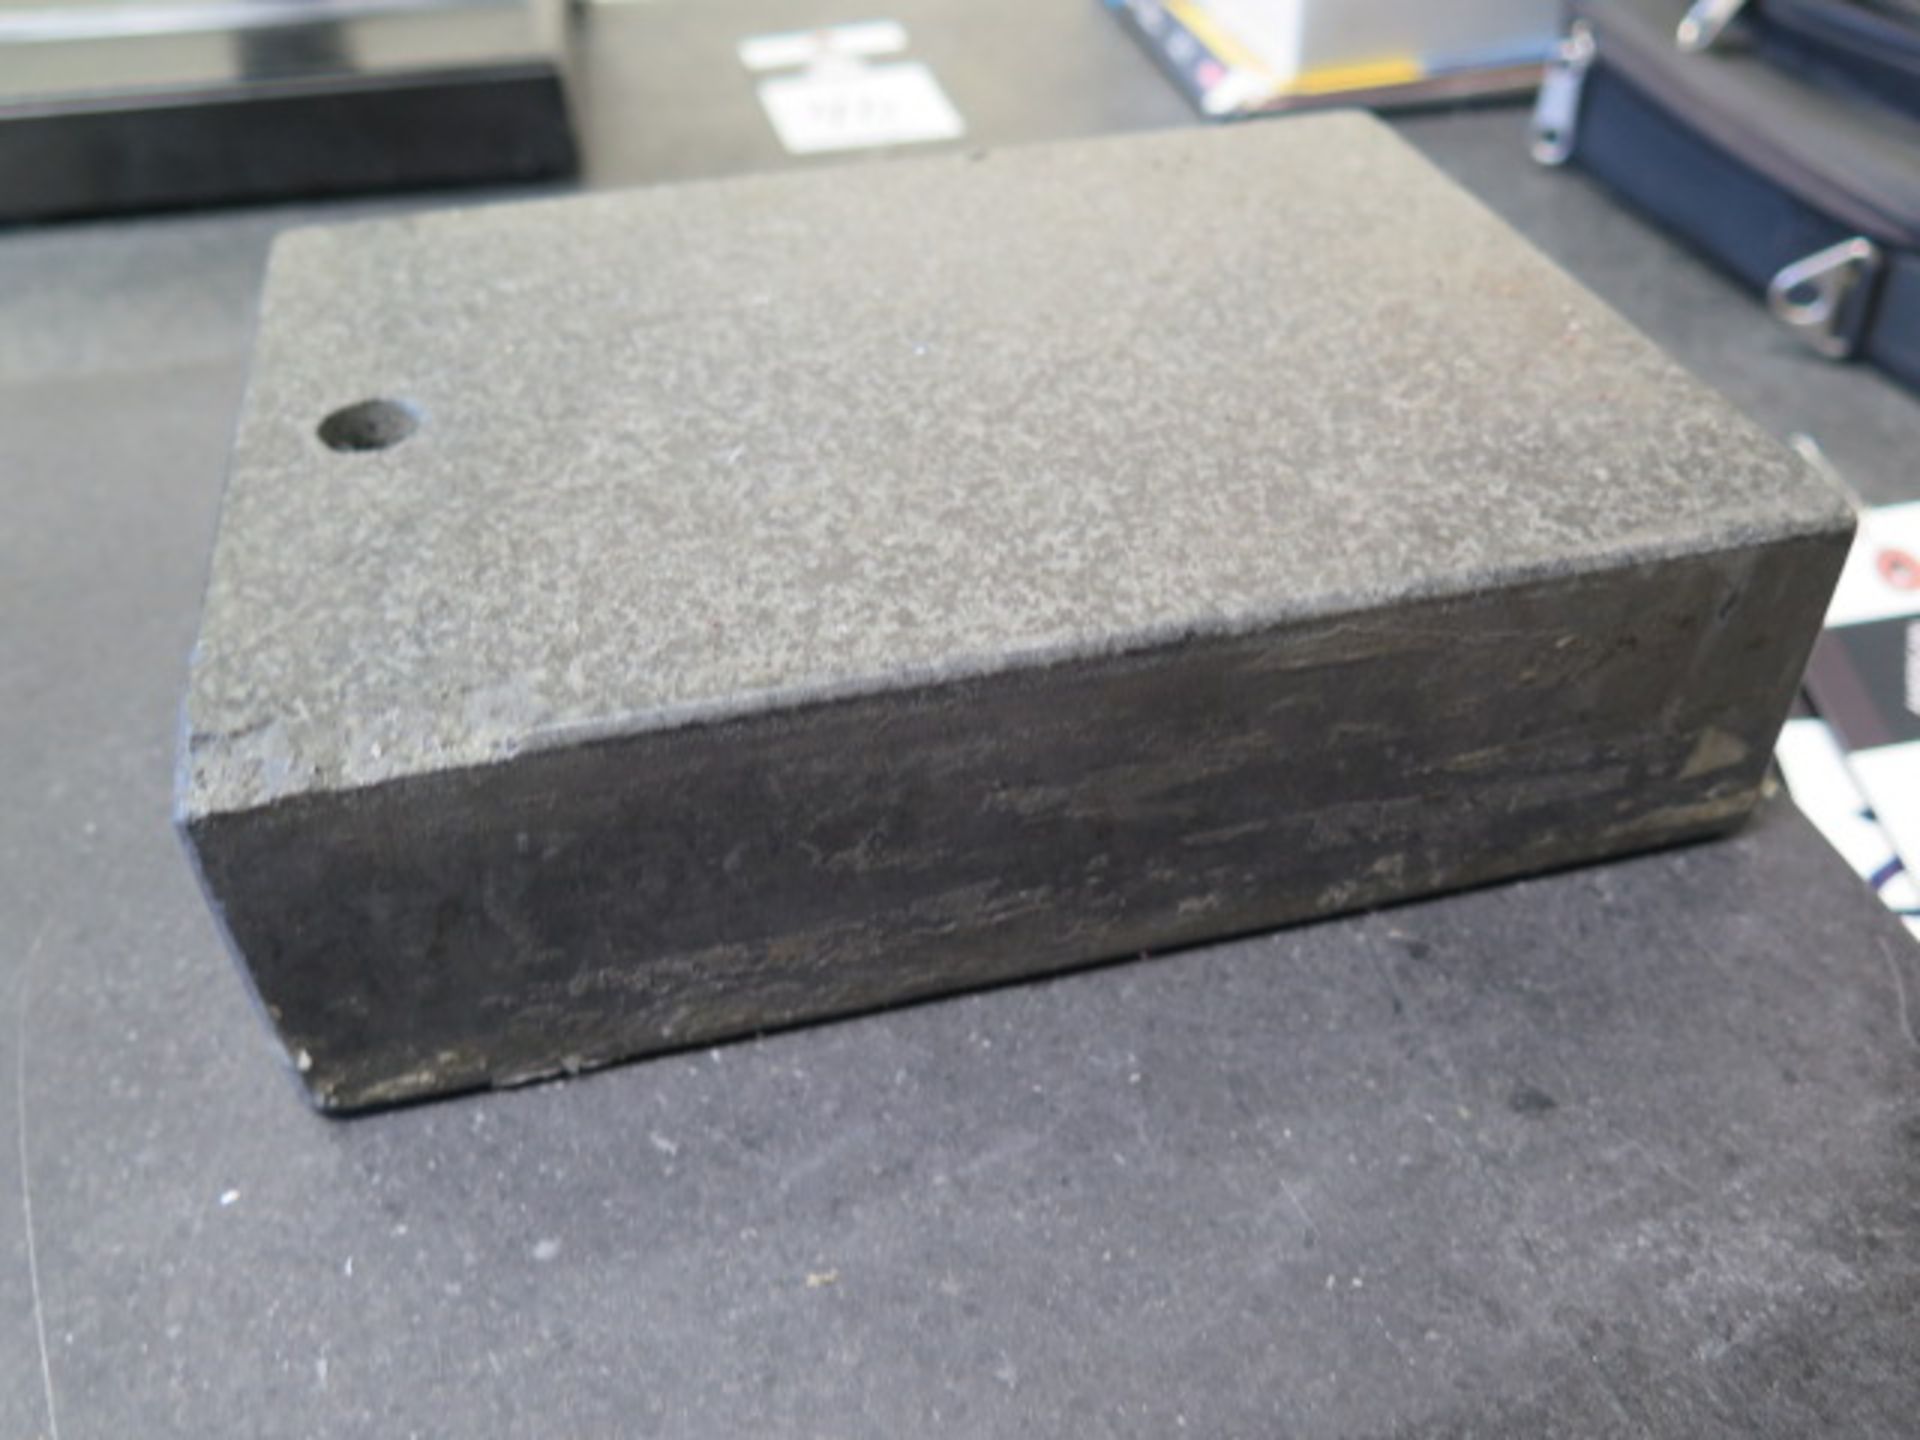 12” x 18” x 3” Granite Surface Plate (SOLD AS-IS - NO WARRANTY) - Image 4 of 4